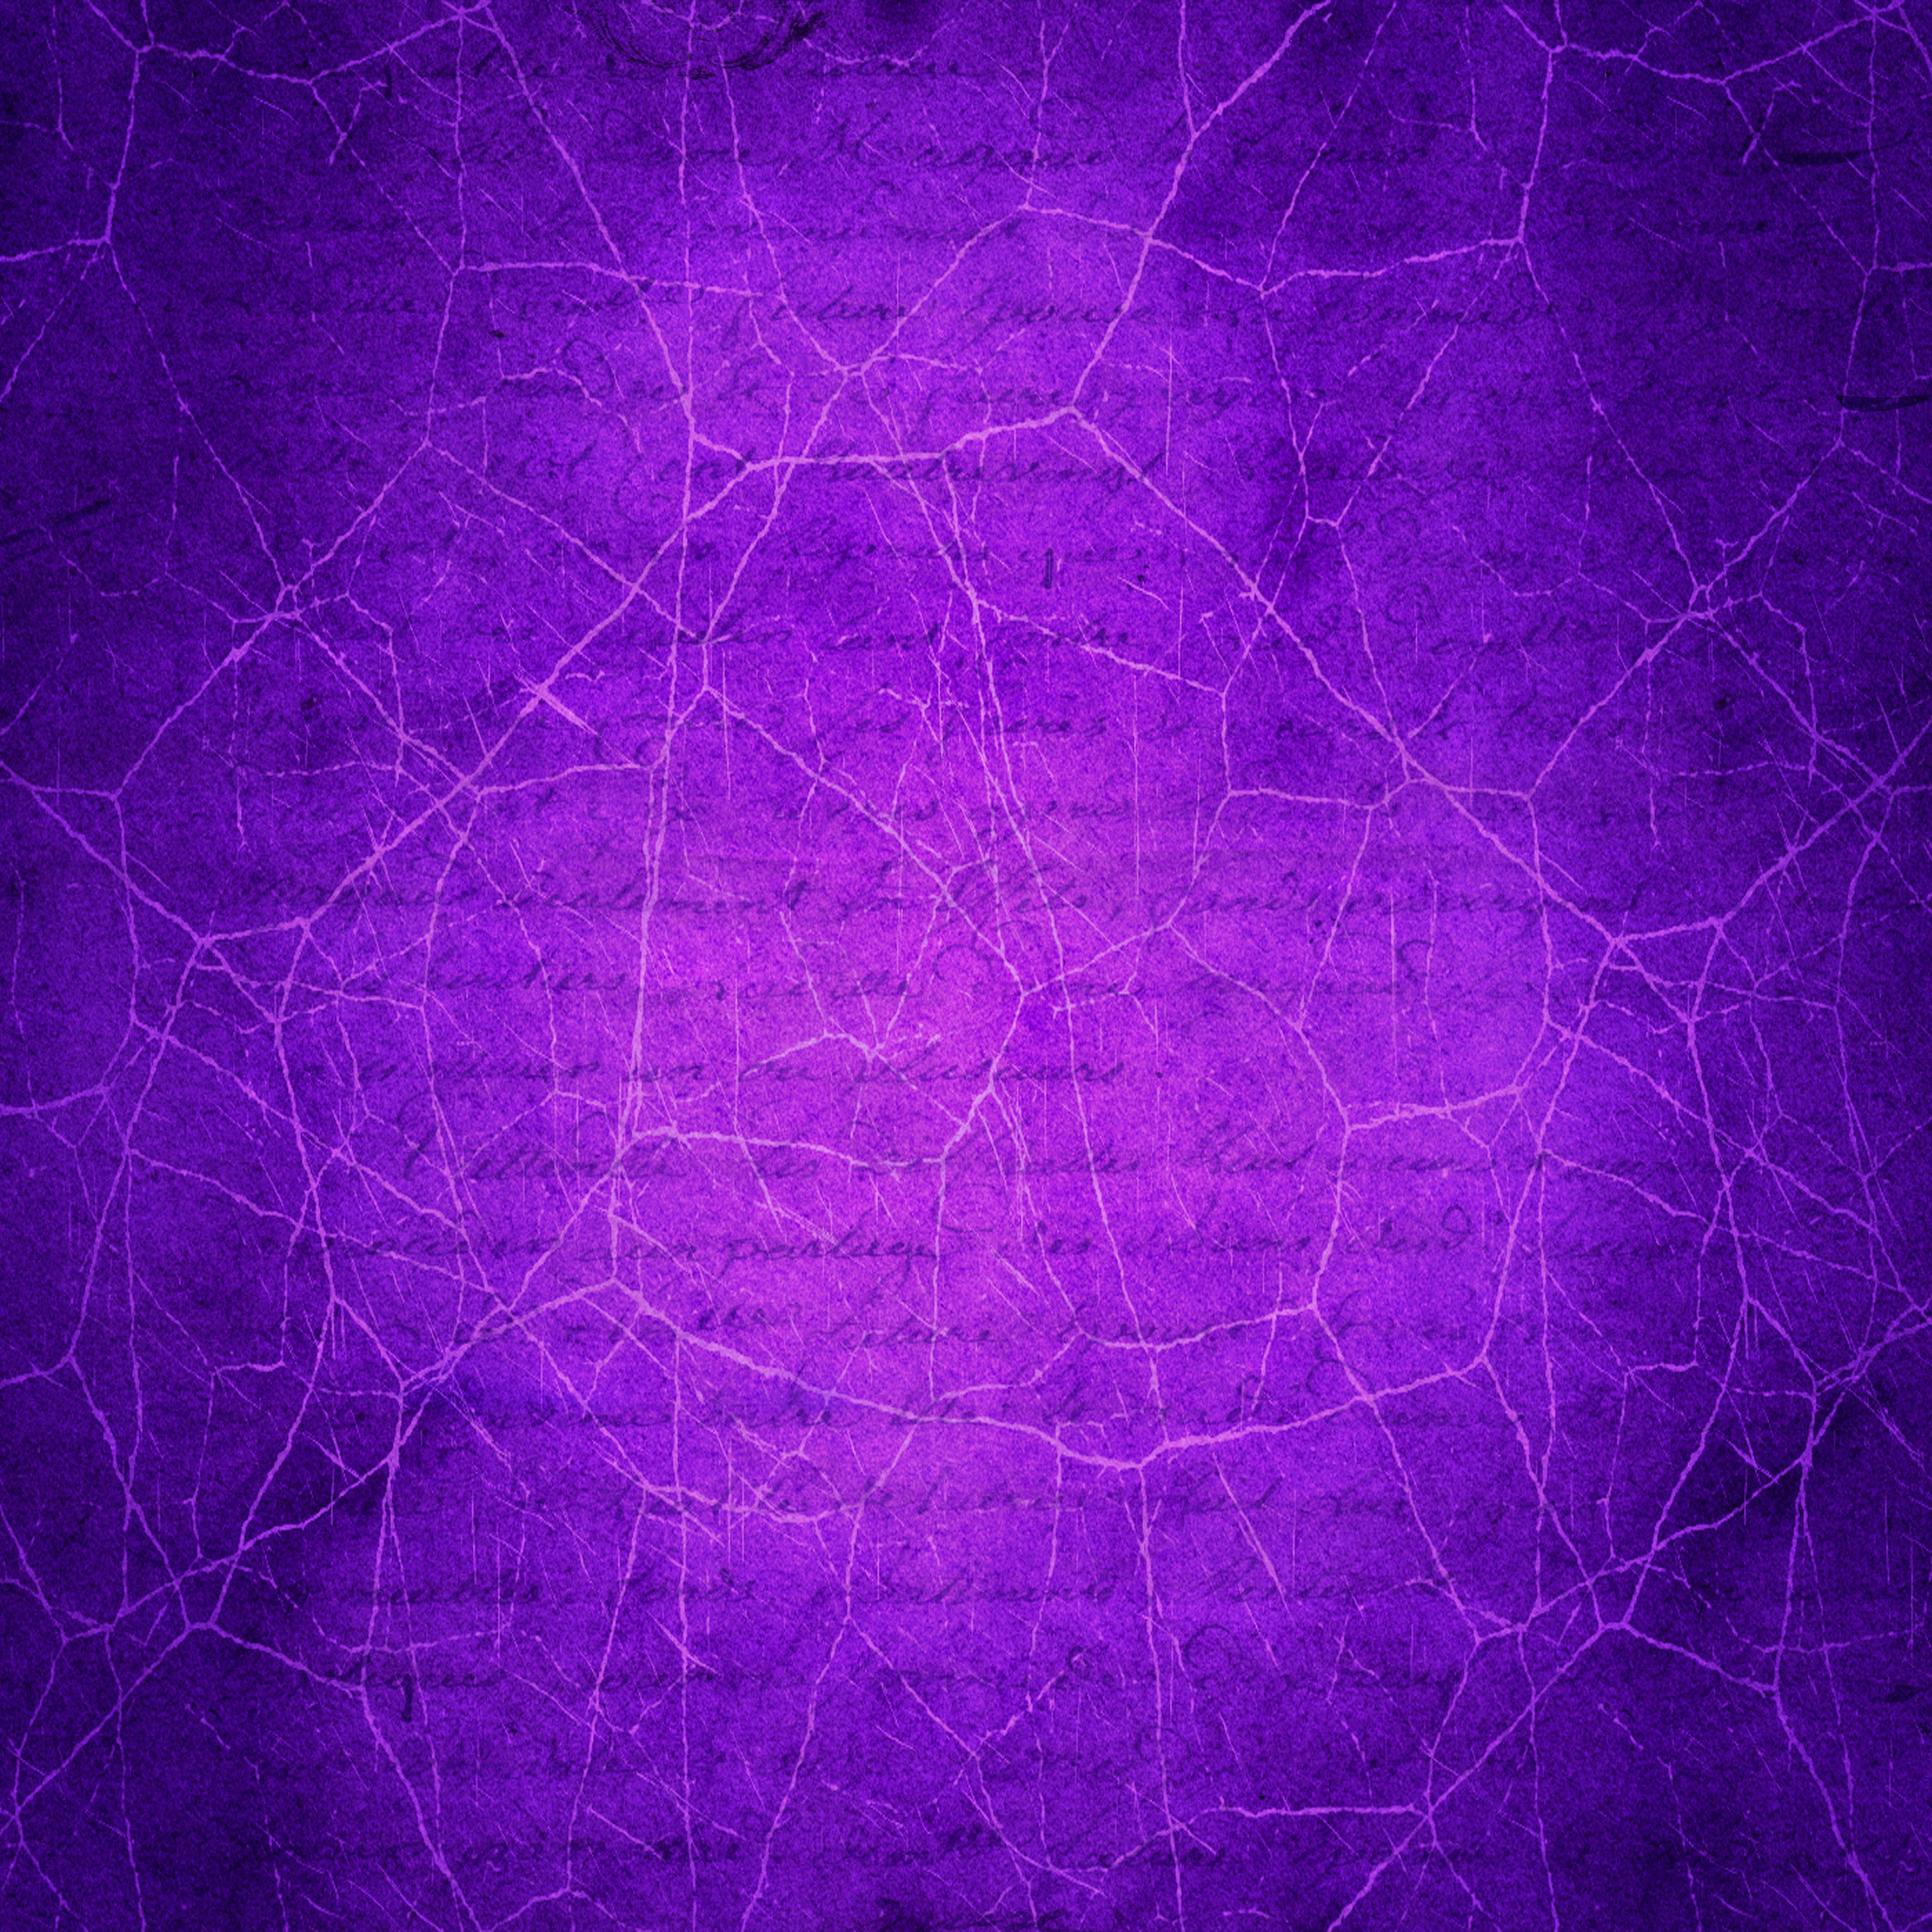 93354 download wallpaper purple, paper, violet, texture, textures, old, scratches, cracks, crack, ancient, scrapbooking screensavers and pictures for free